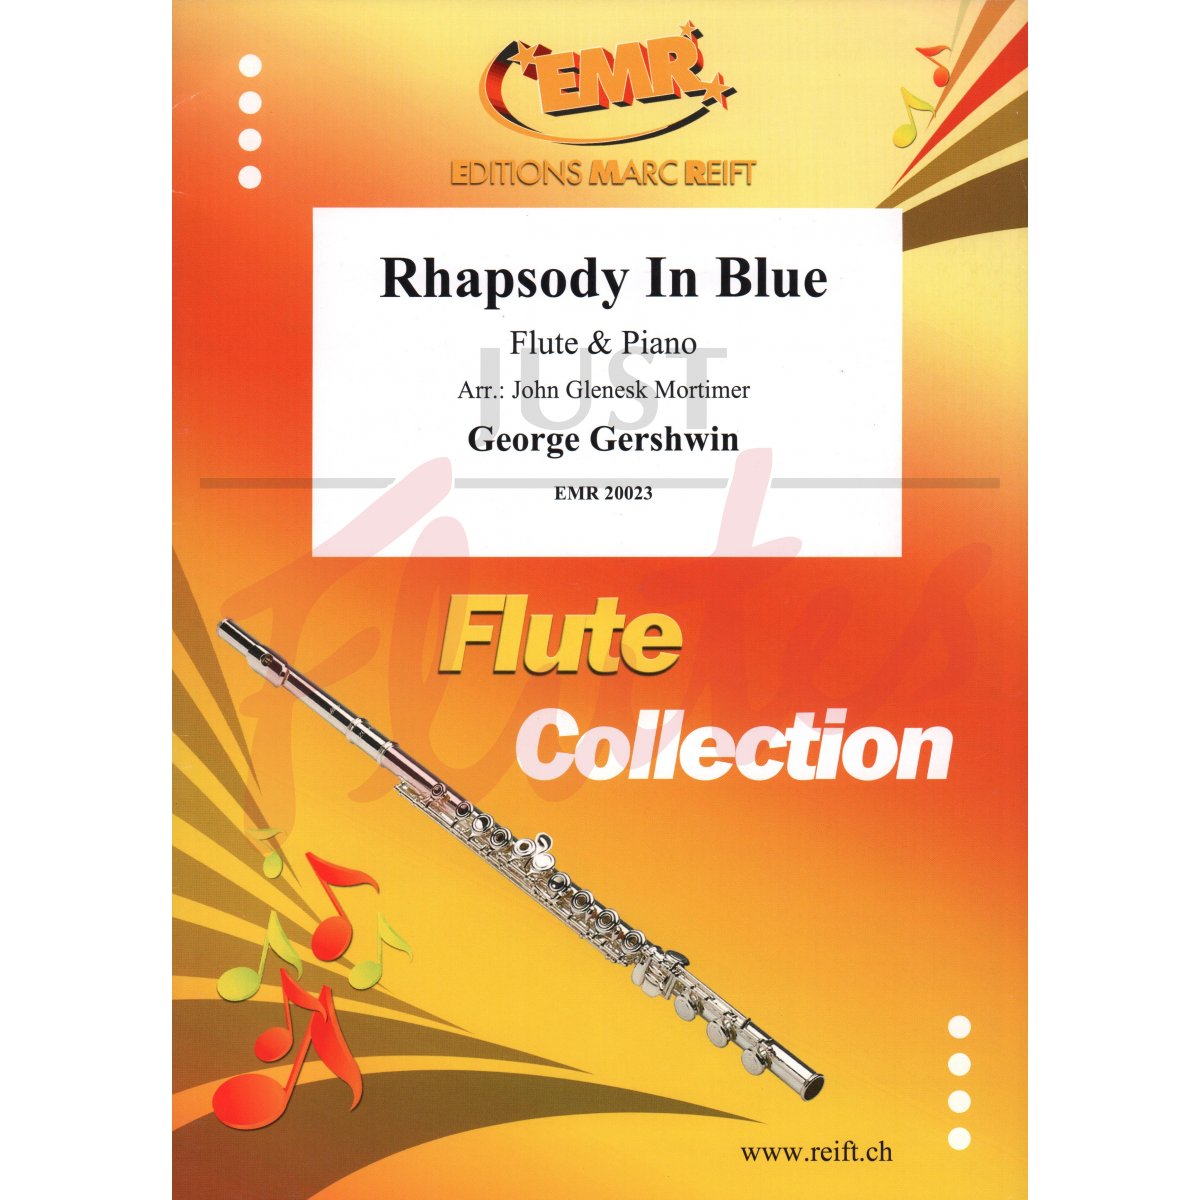 Rhapsody in Blue arranged for Flute and Piano